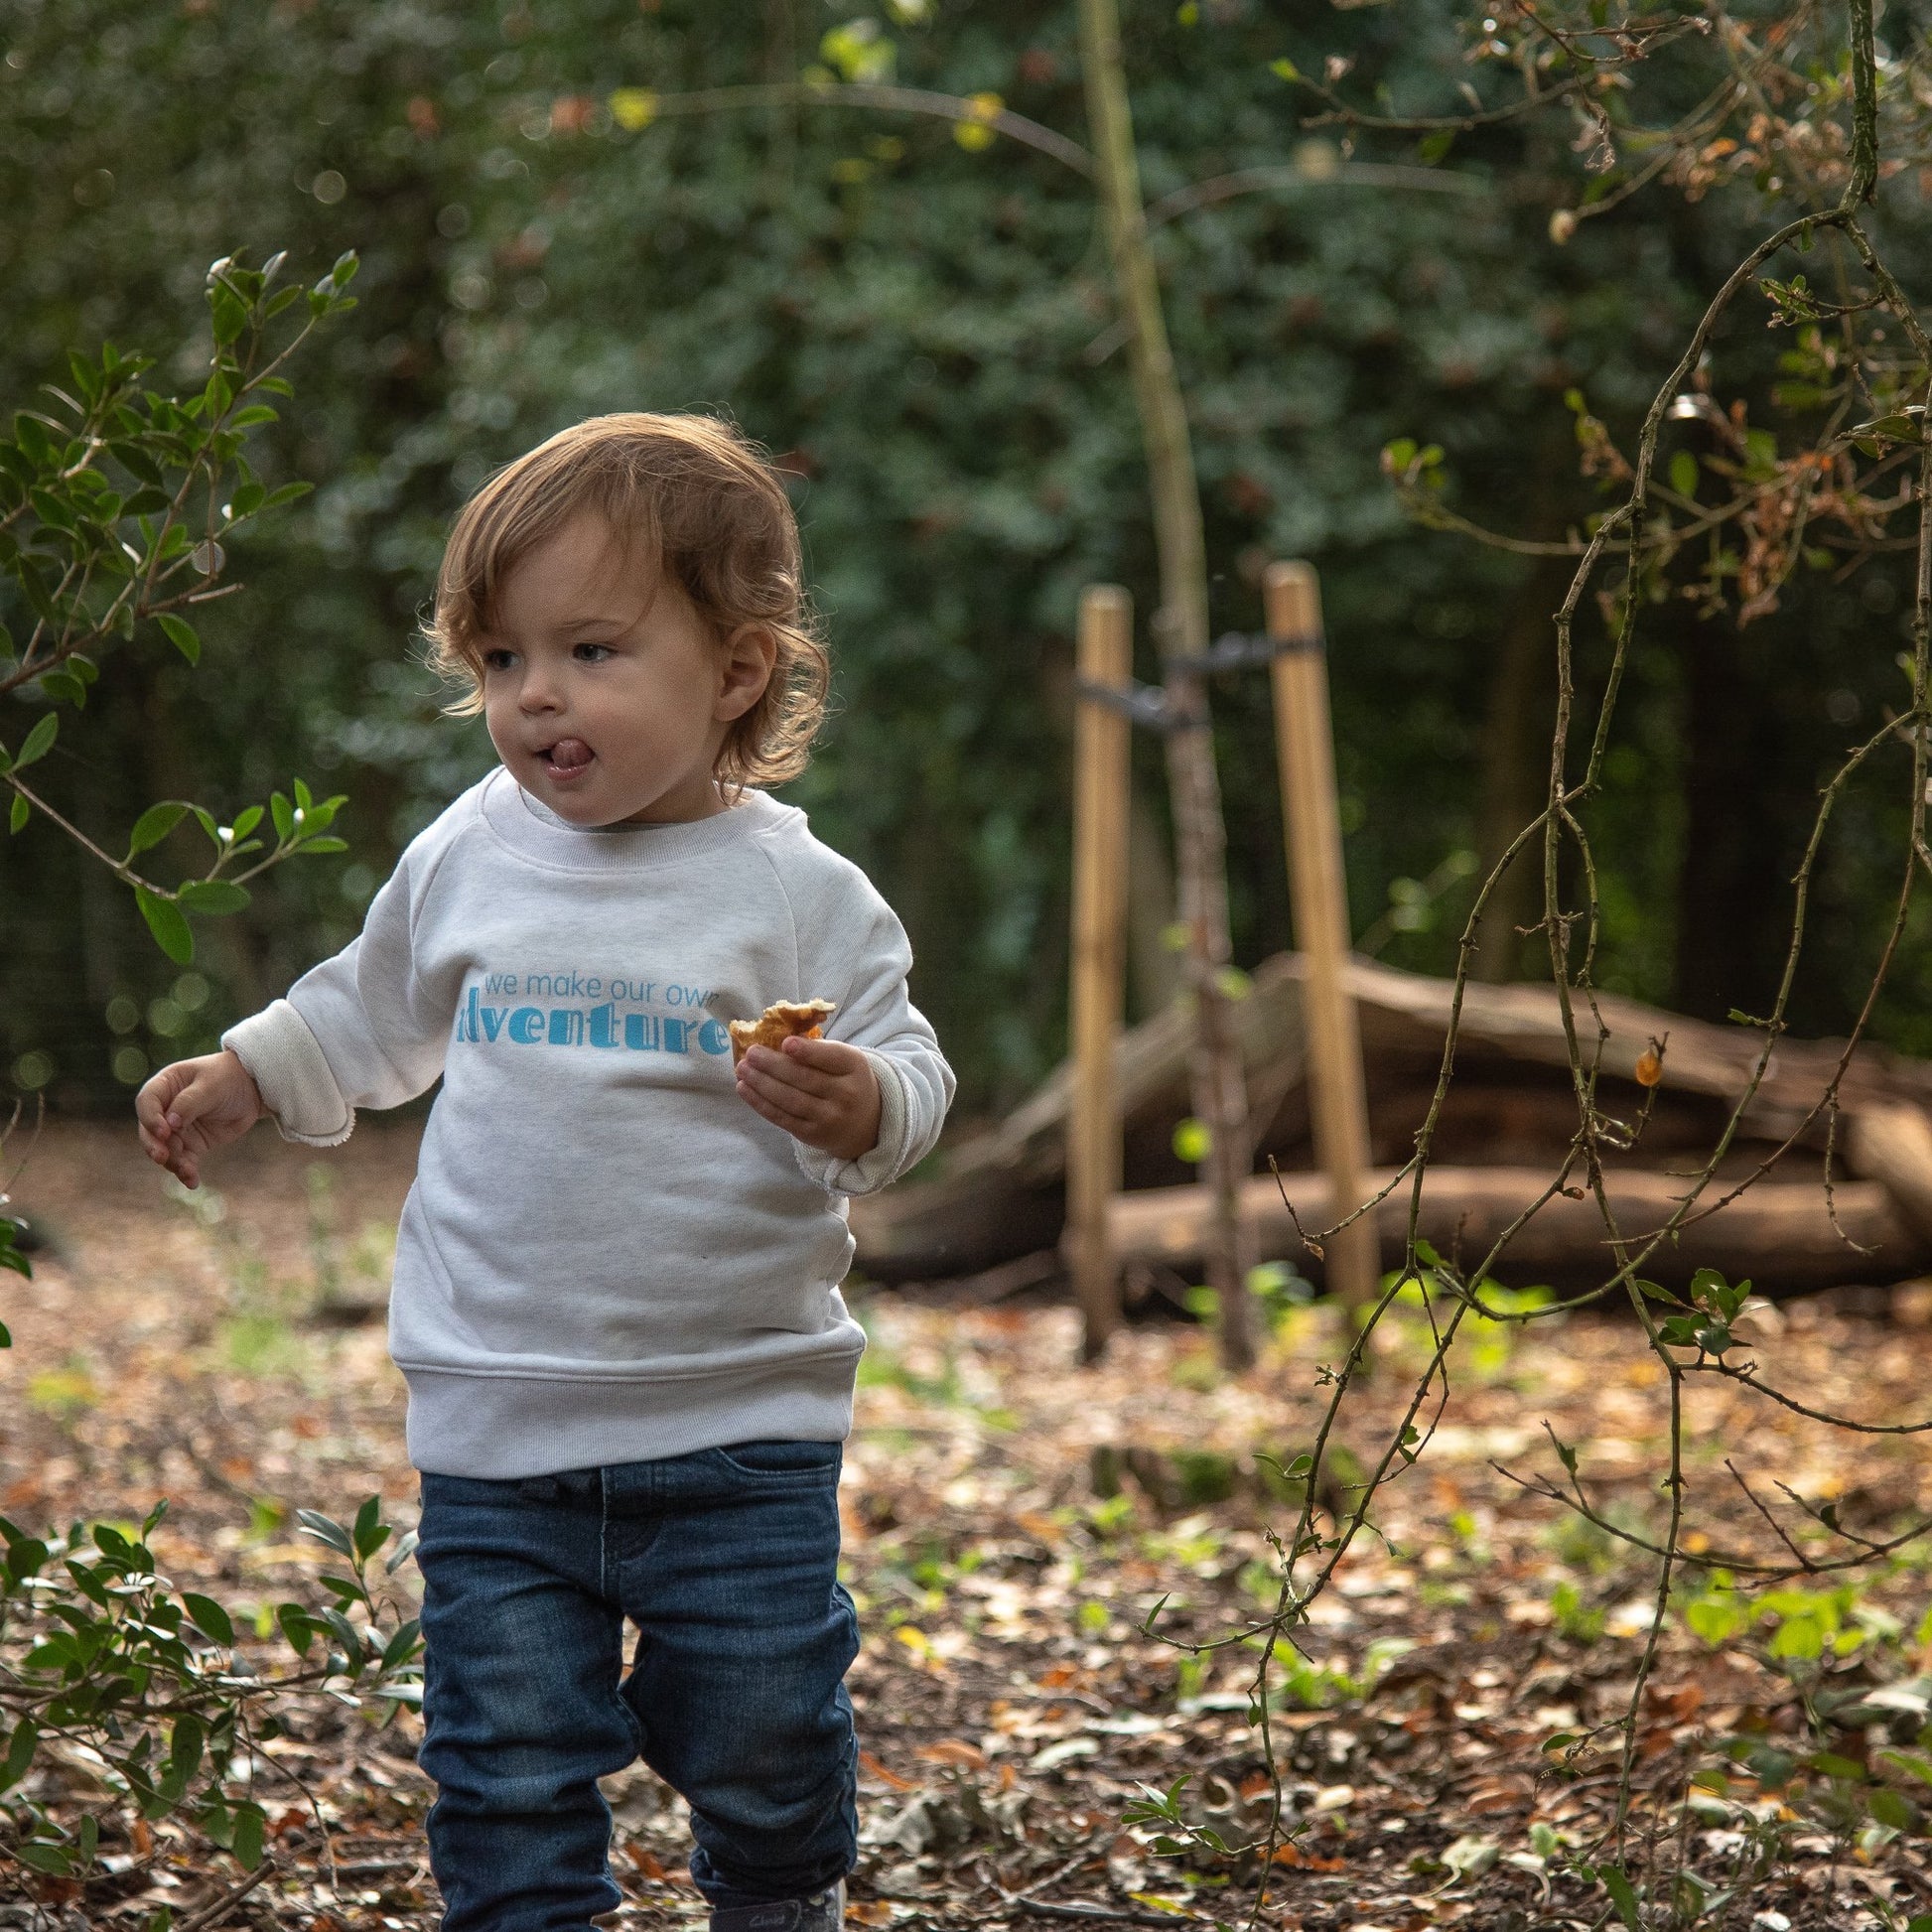 WE MAKE OUR OWN ADVENTURE - Toddler + Youth Sweatshirt - Little Mate Adventures